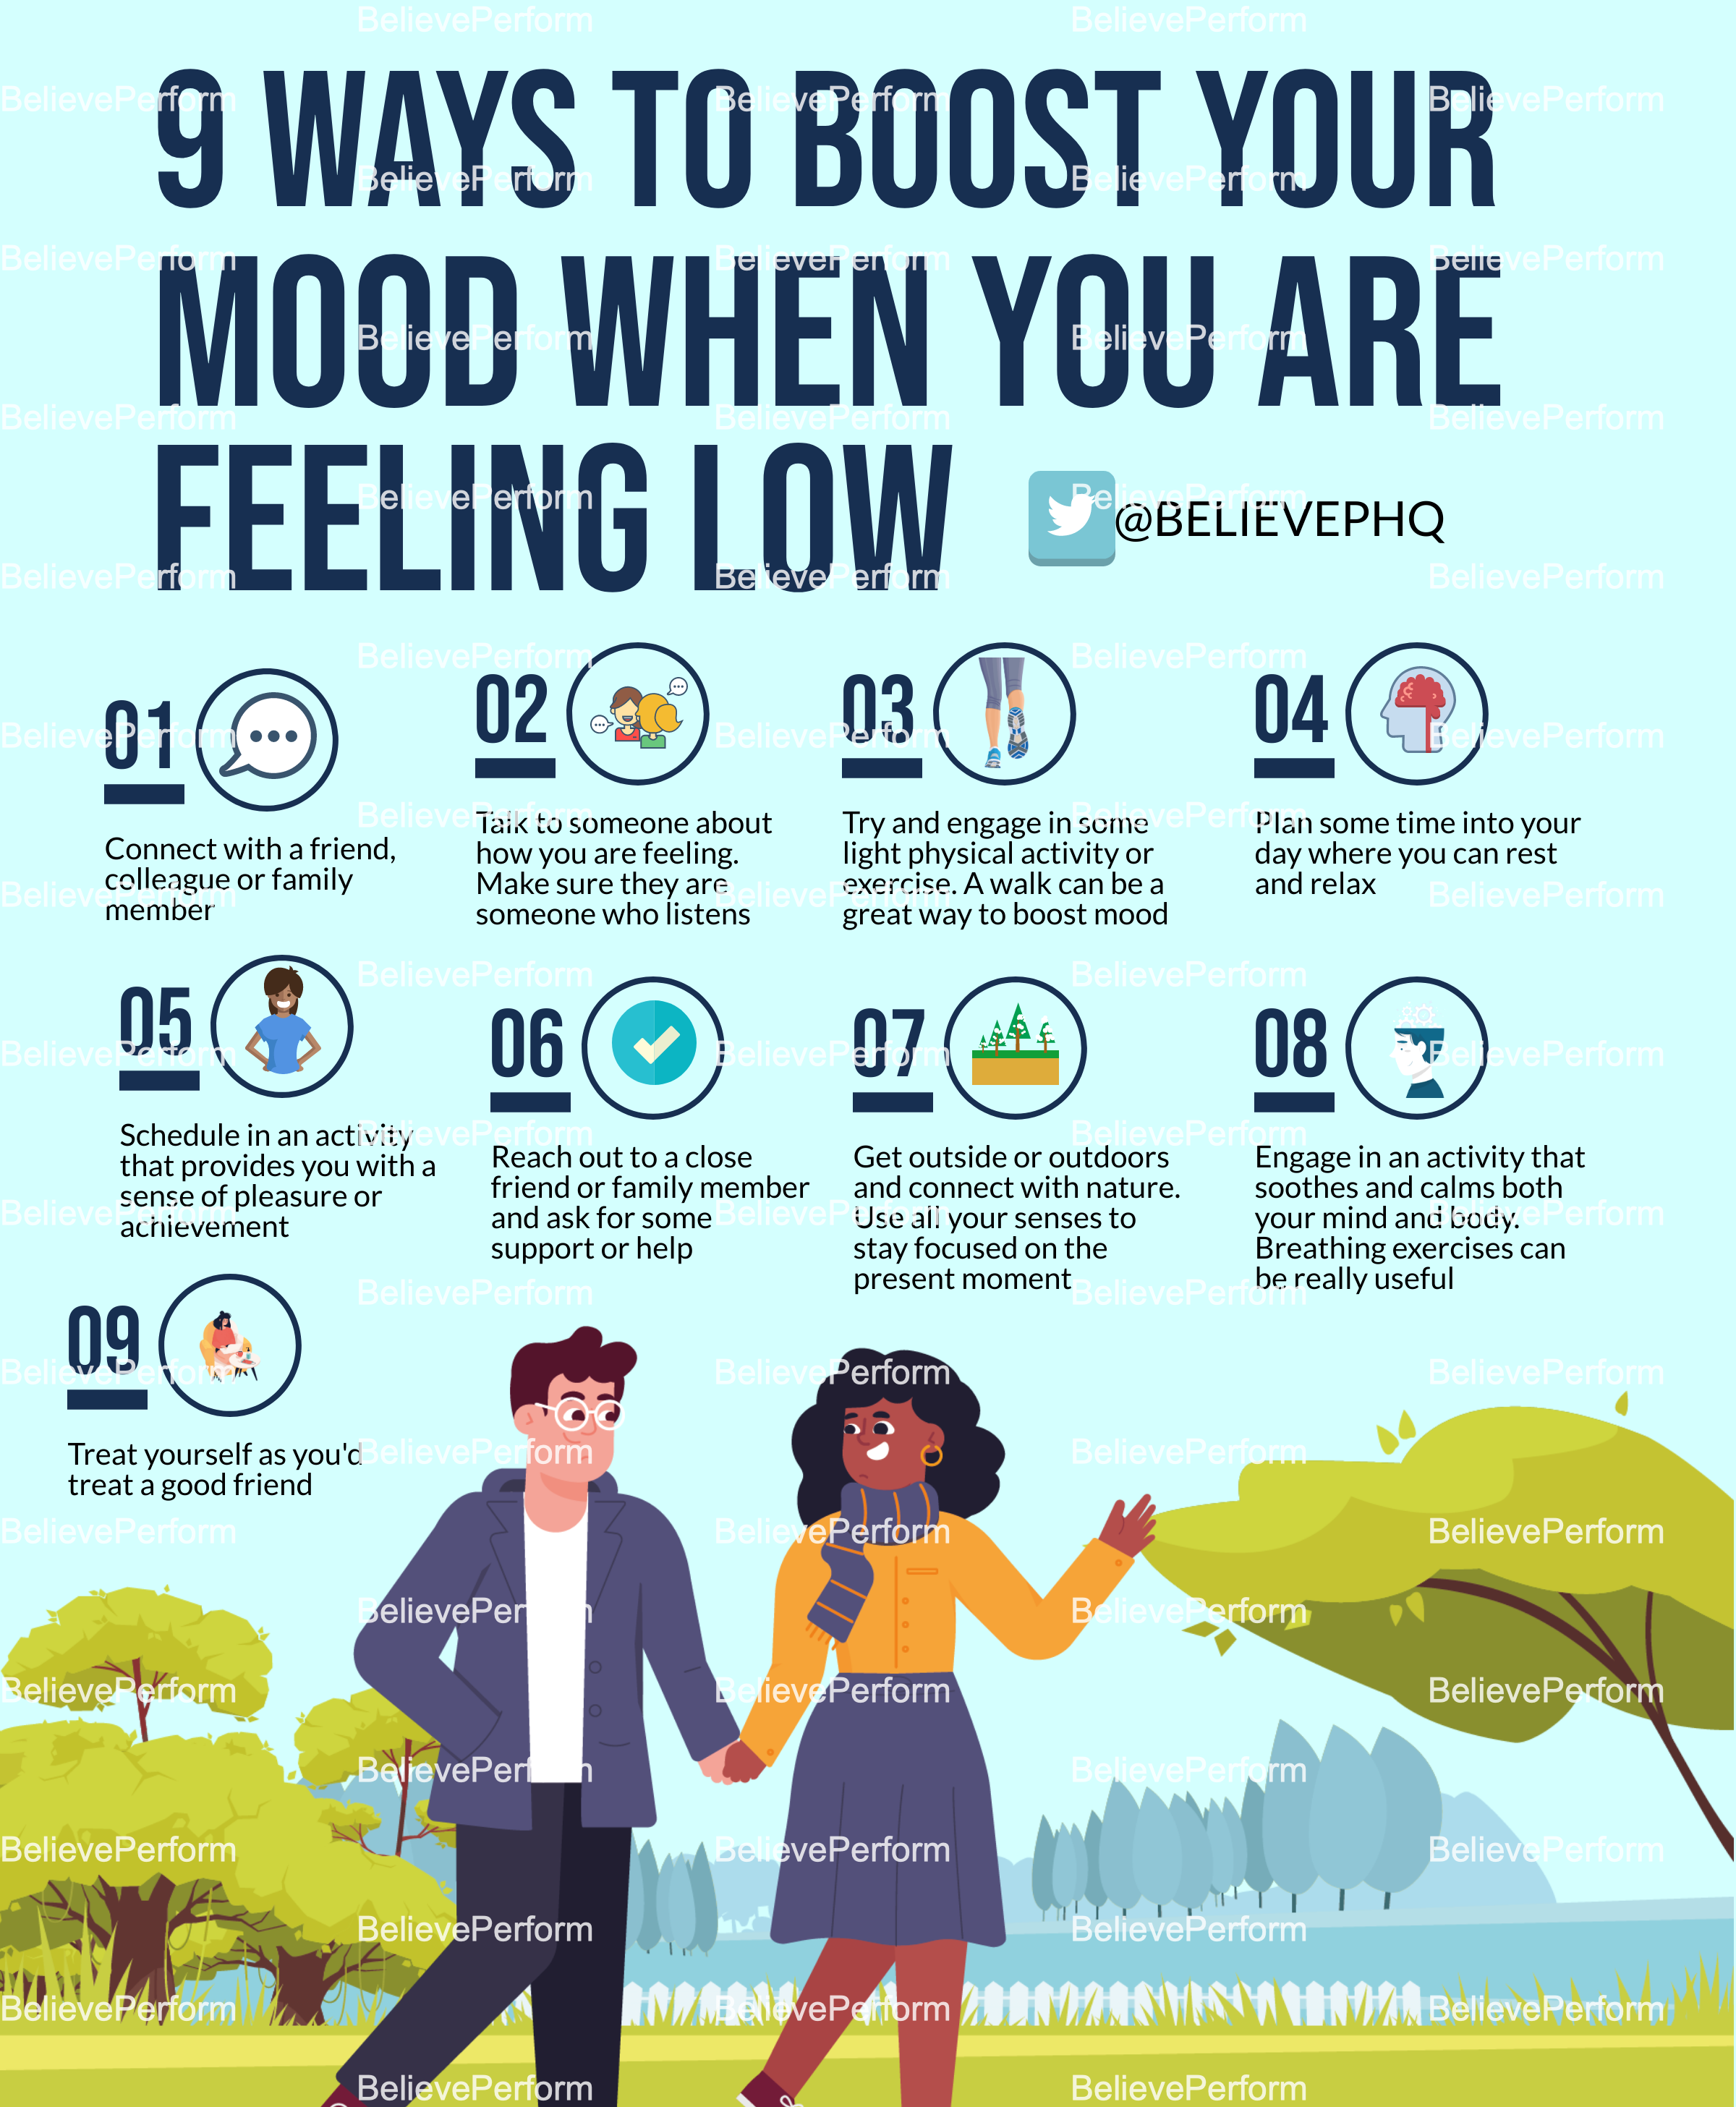 9 ways to boost your mood when you are feeling low ...